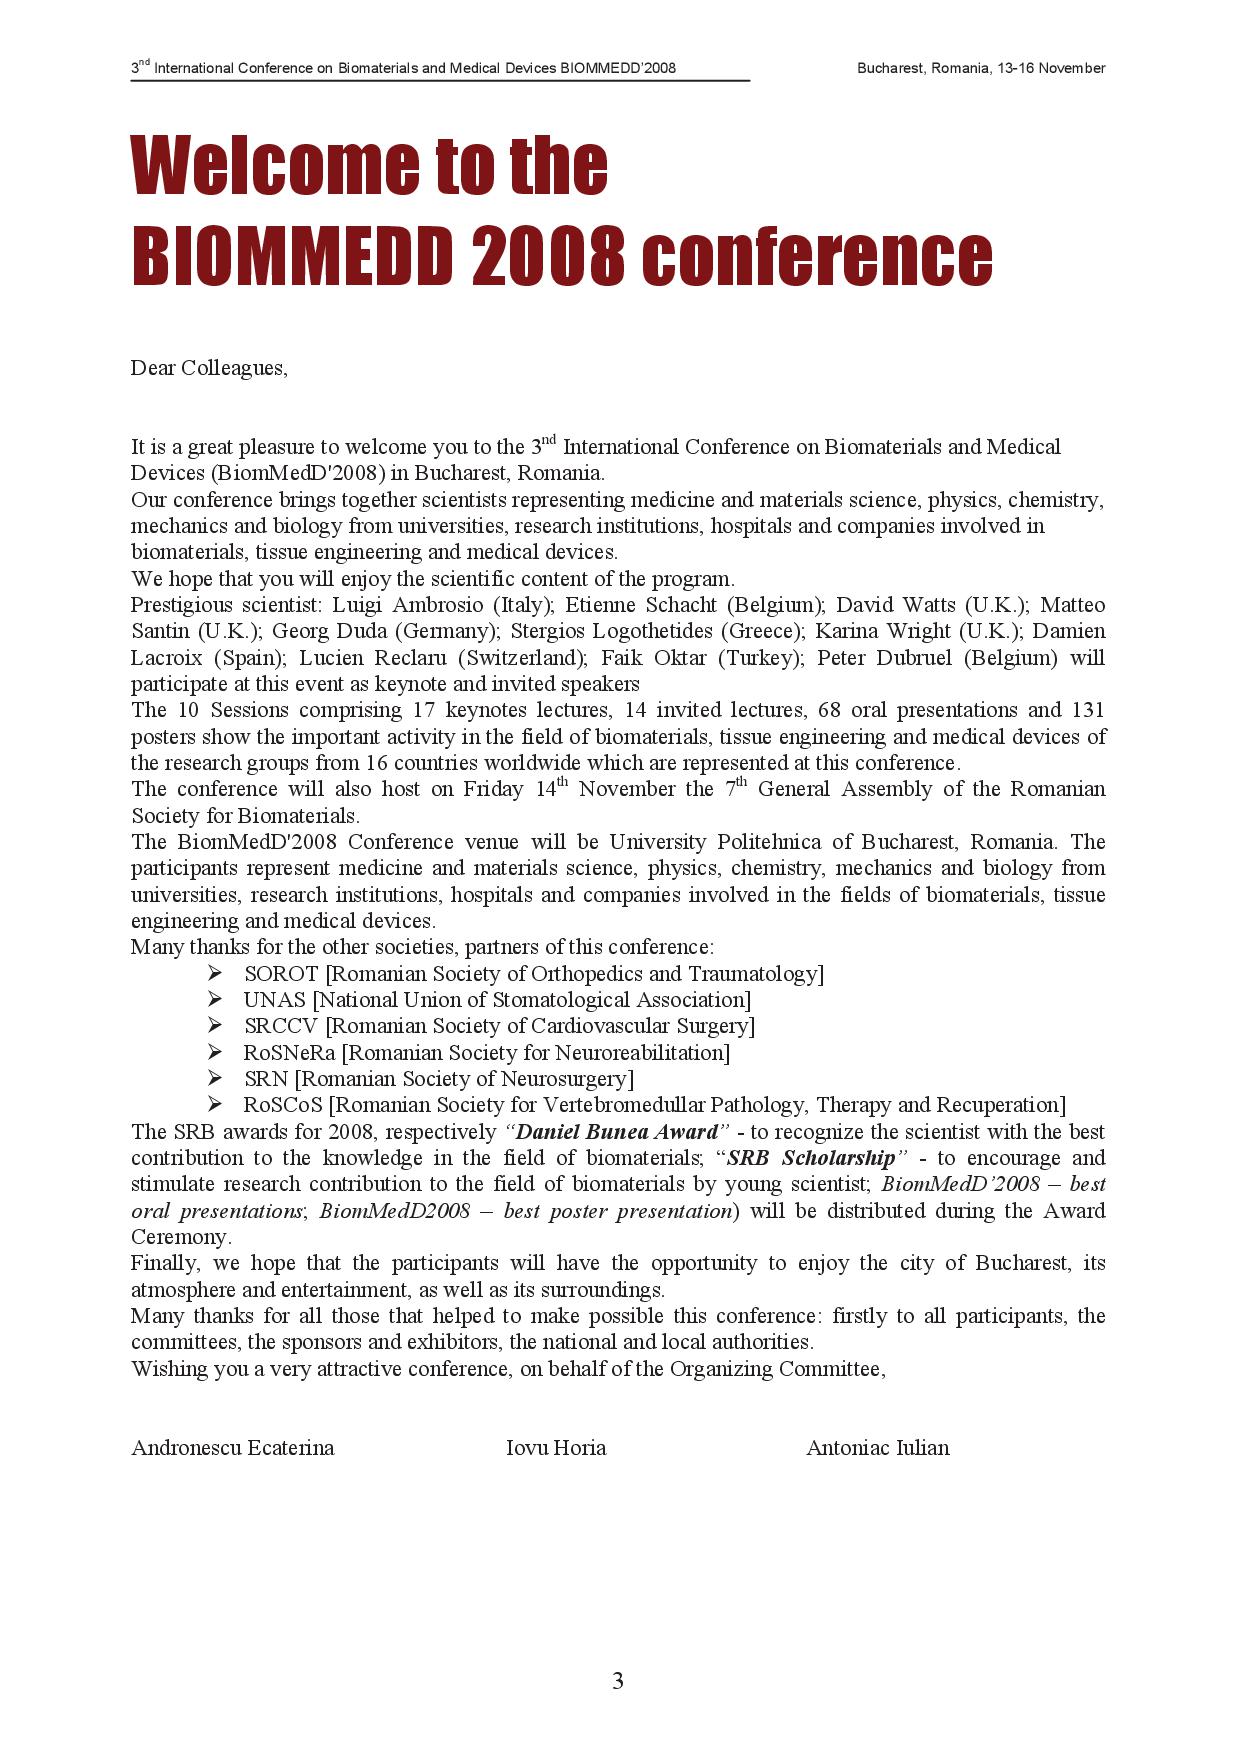 3rd International Conference on Biomaterials and Medical Devices BIOMMEDD’2008